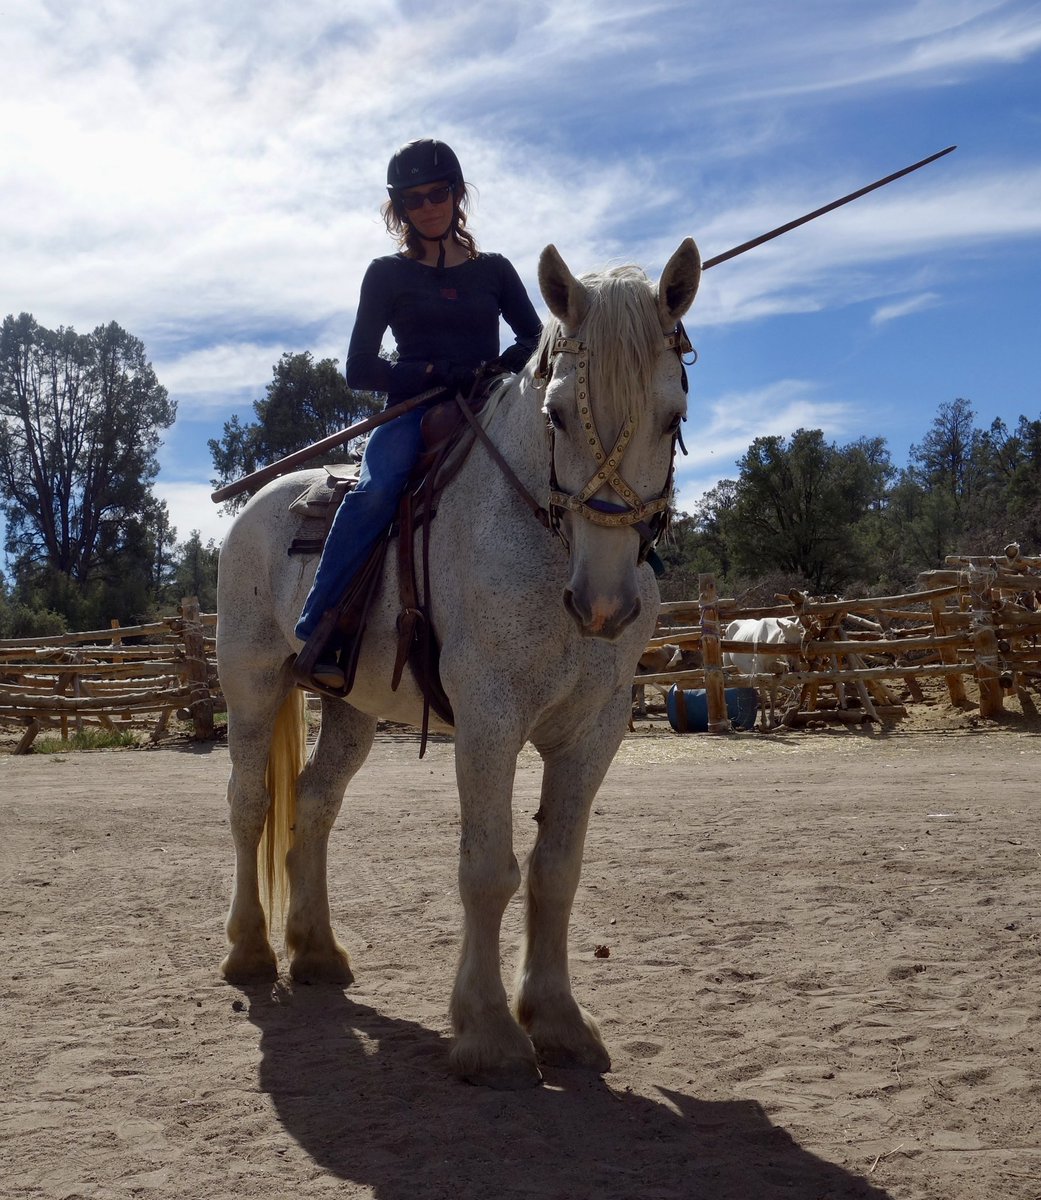 The wife, with a 10’ practice lance, ready to do the rings before a joust. As one does. Merlin, of course, is the horse. He’s a very good guy.